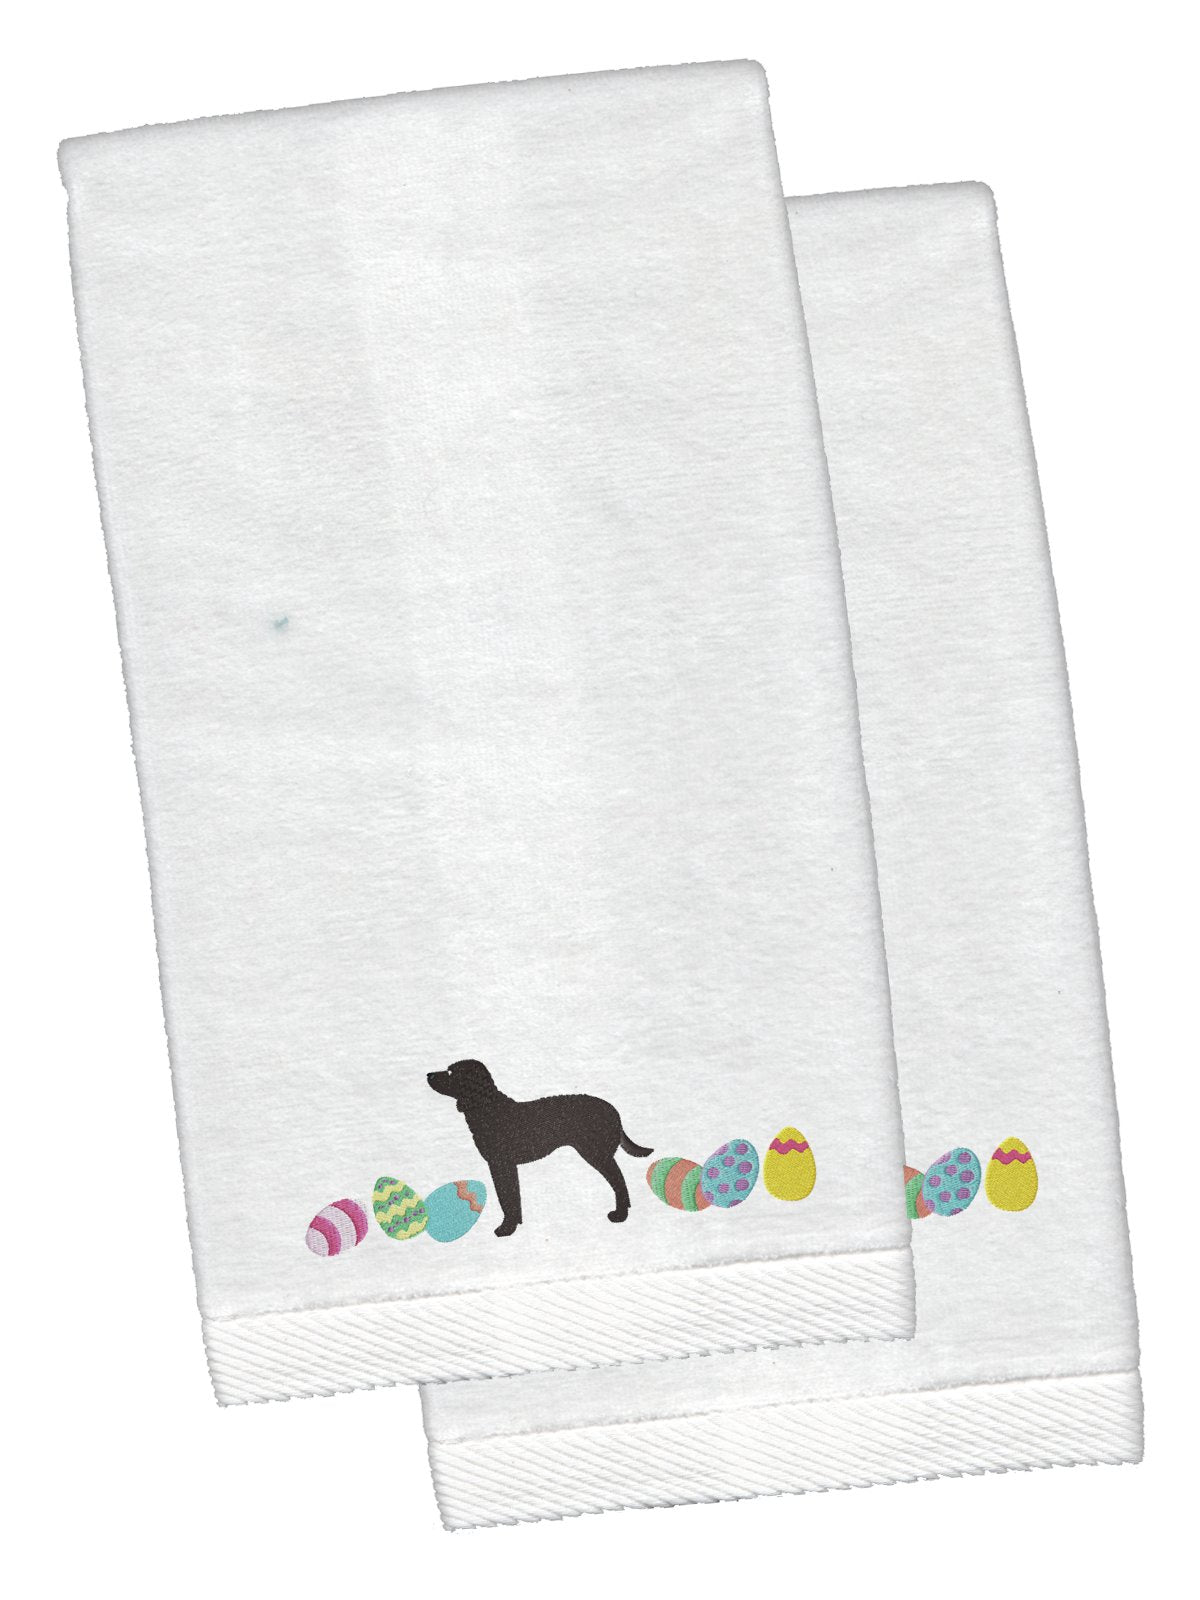 American Water Spaniel Easter White Embroidered Plush Hand Towel Set of 2 CK1597KTEMB by Caroline's Treasures